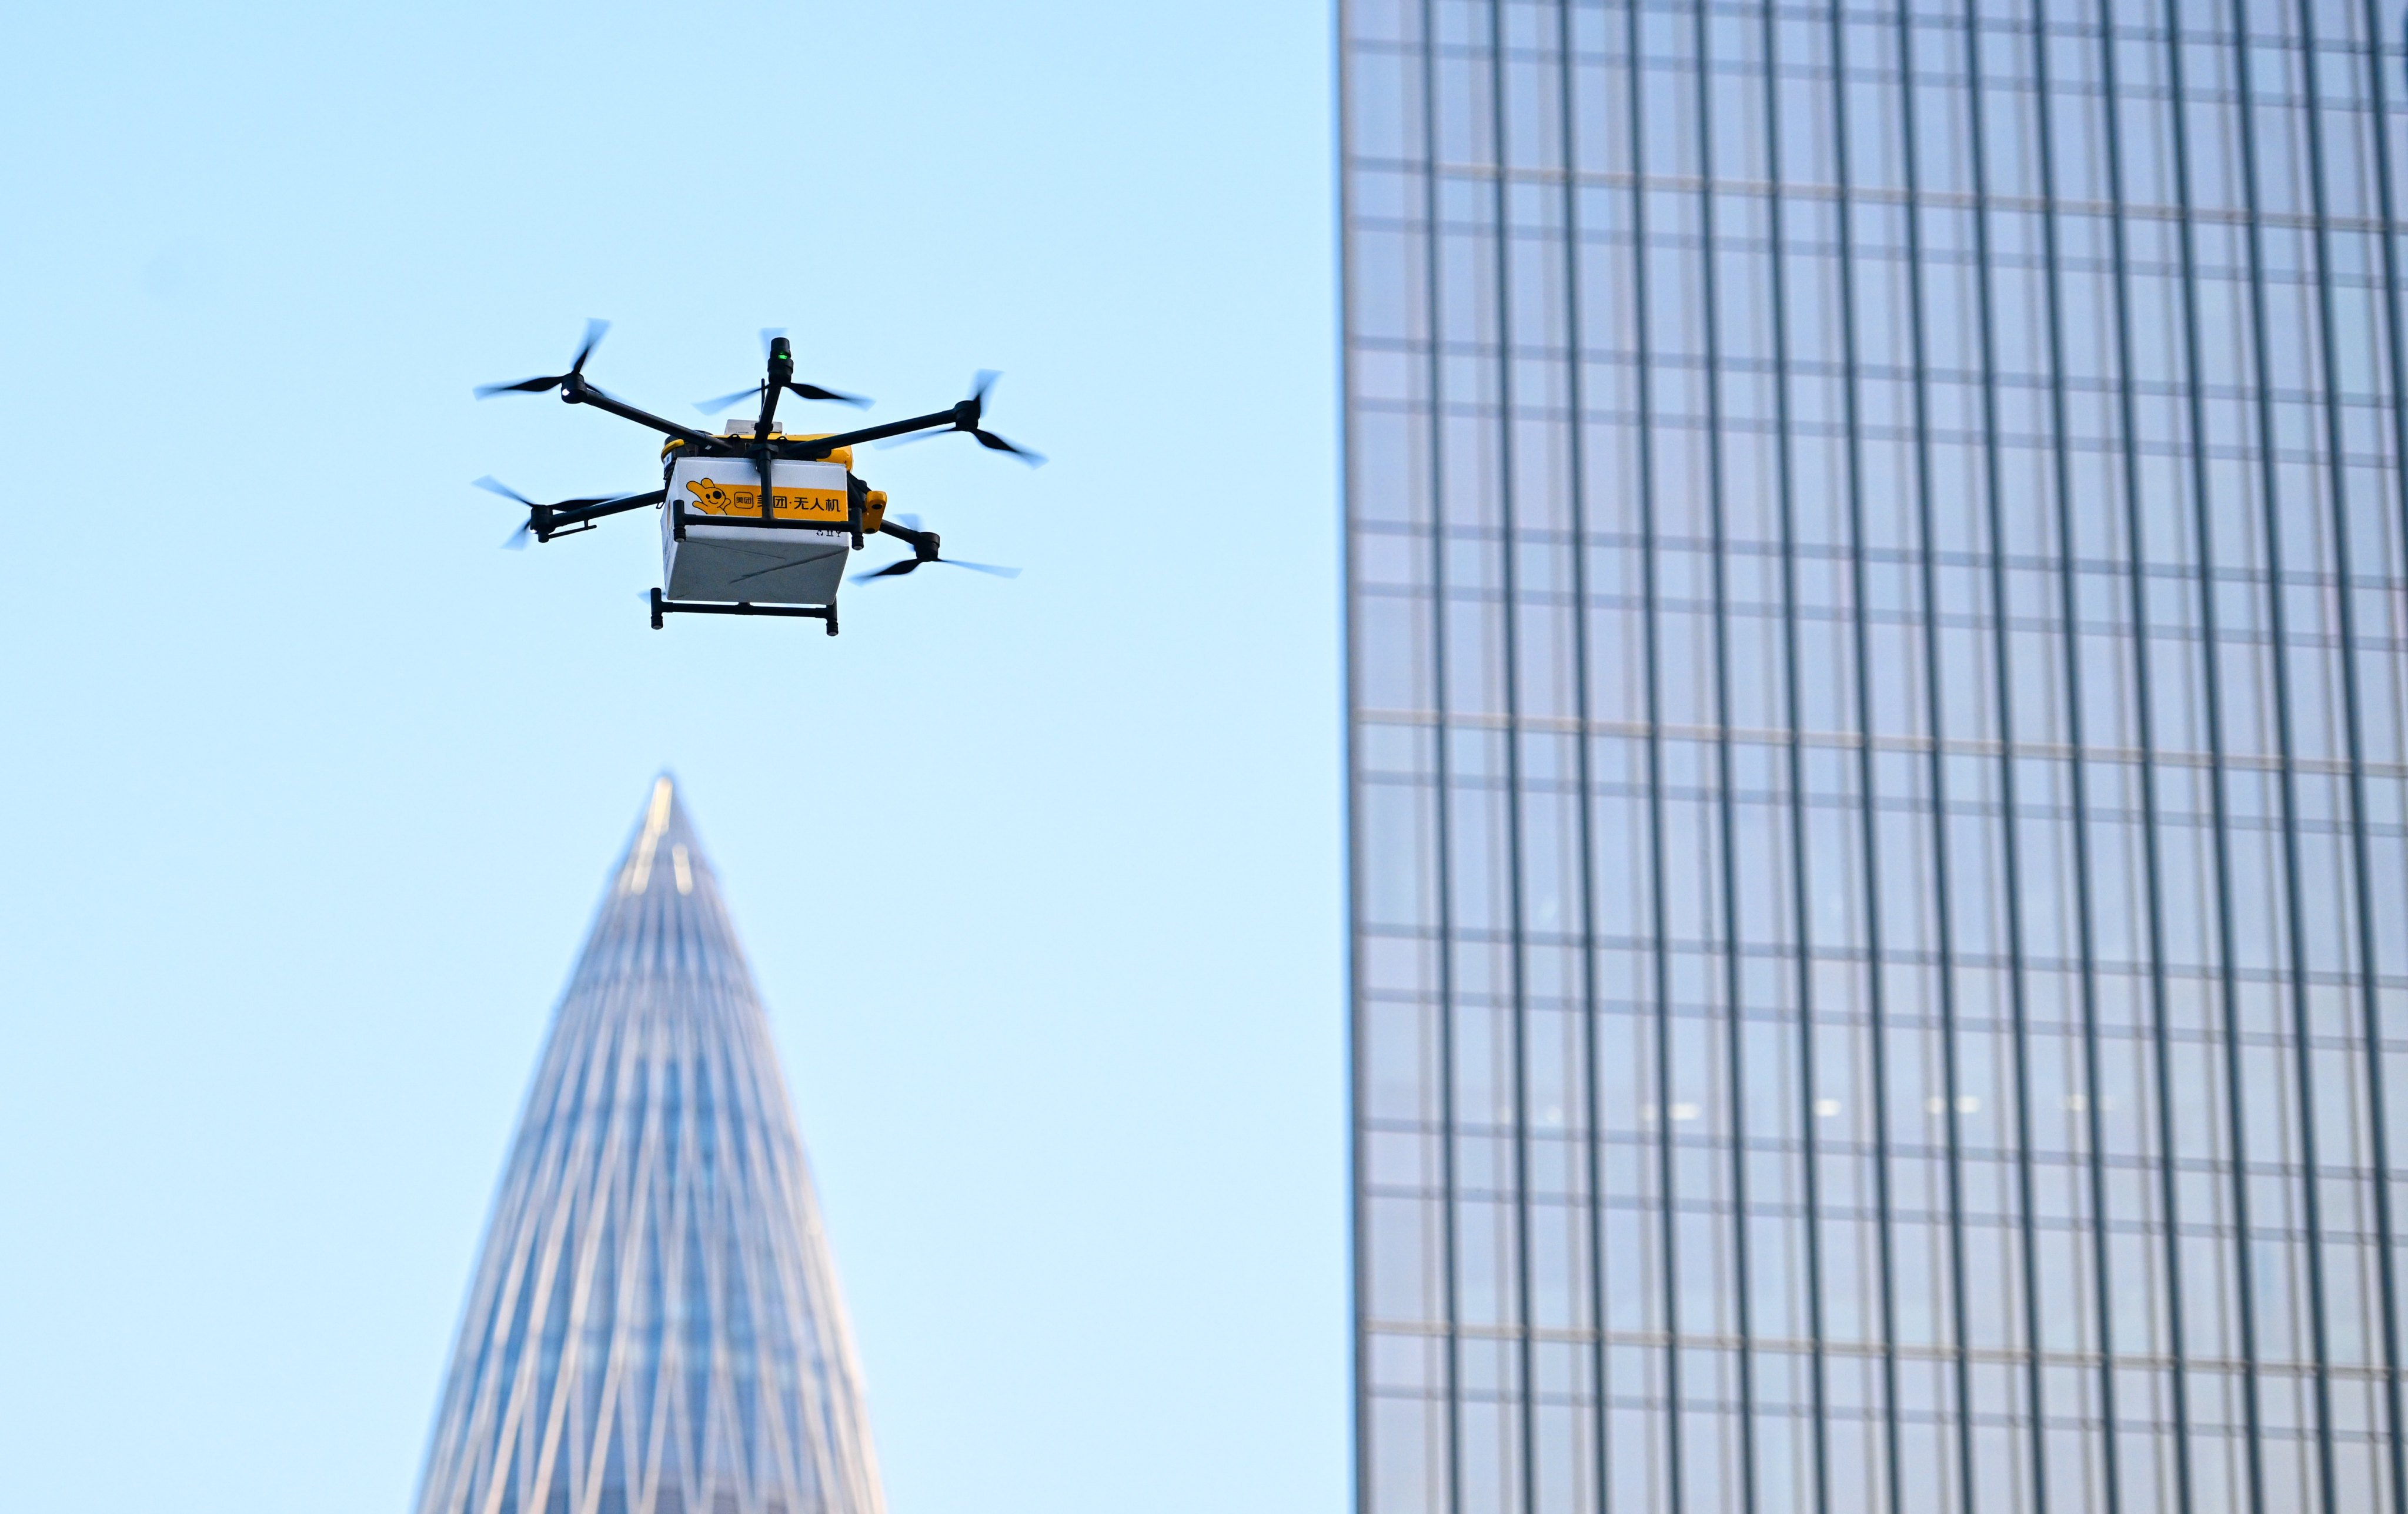 A district in China’s southern provincial capital has been named as a staging ground for the “low-altitude economy”, a growing sector most familiar to consumers through drones. Photo: Xinhua